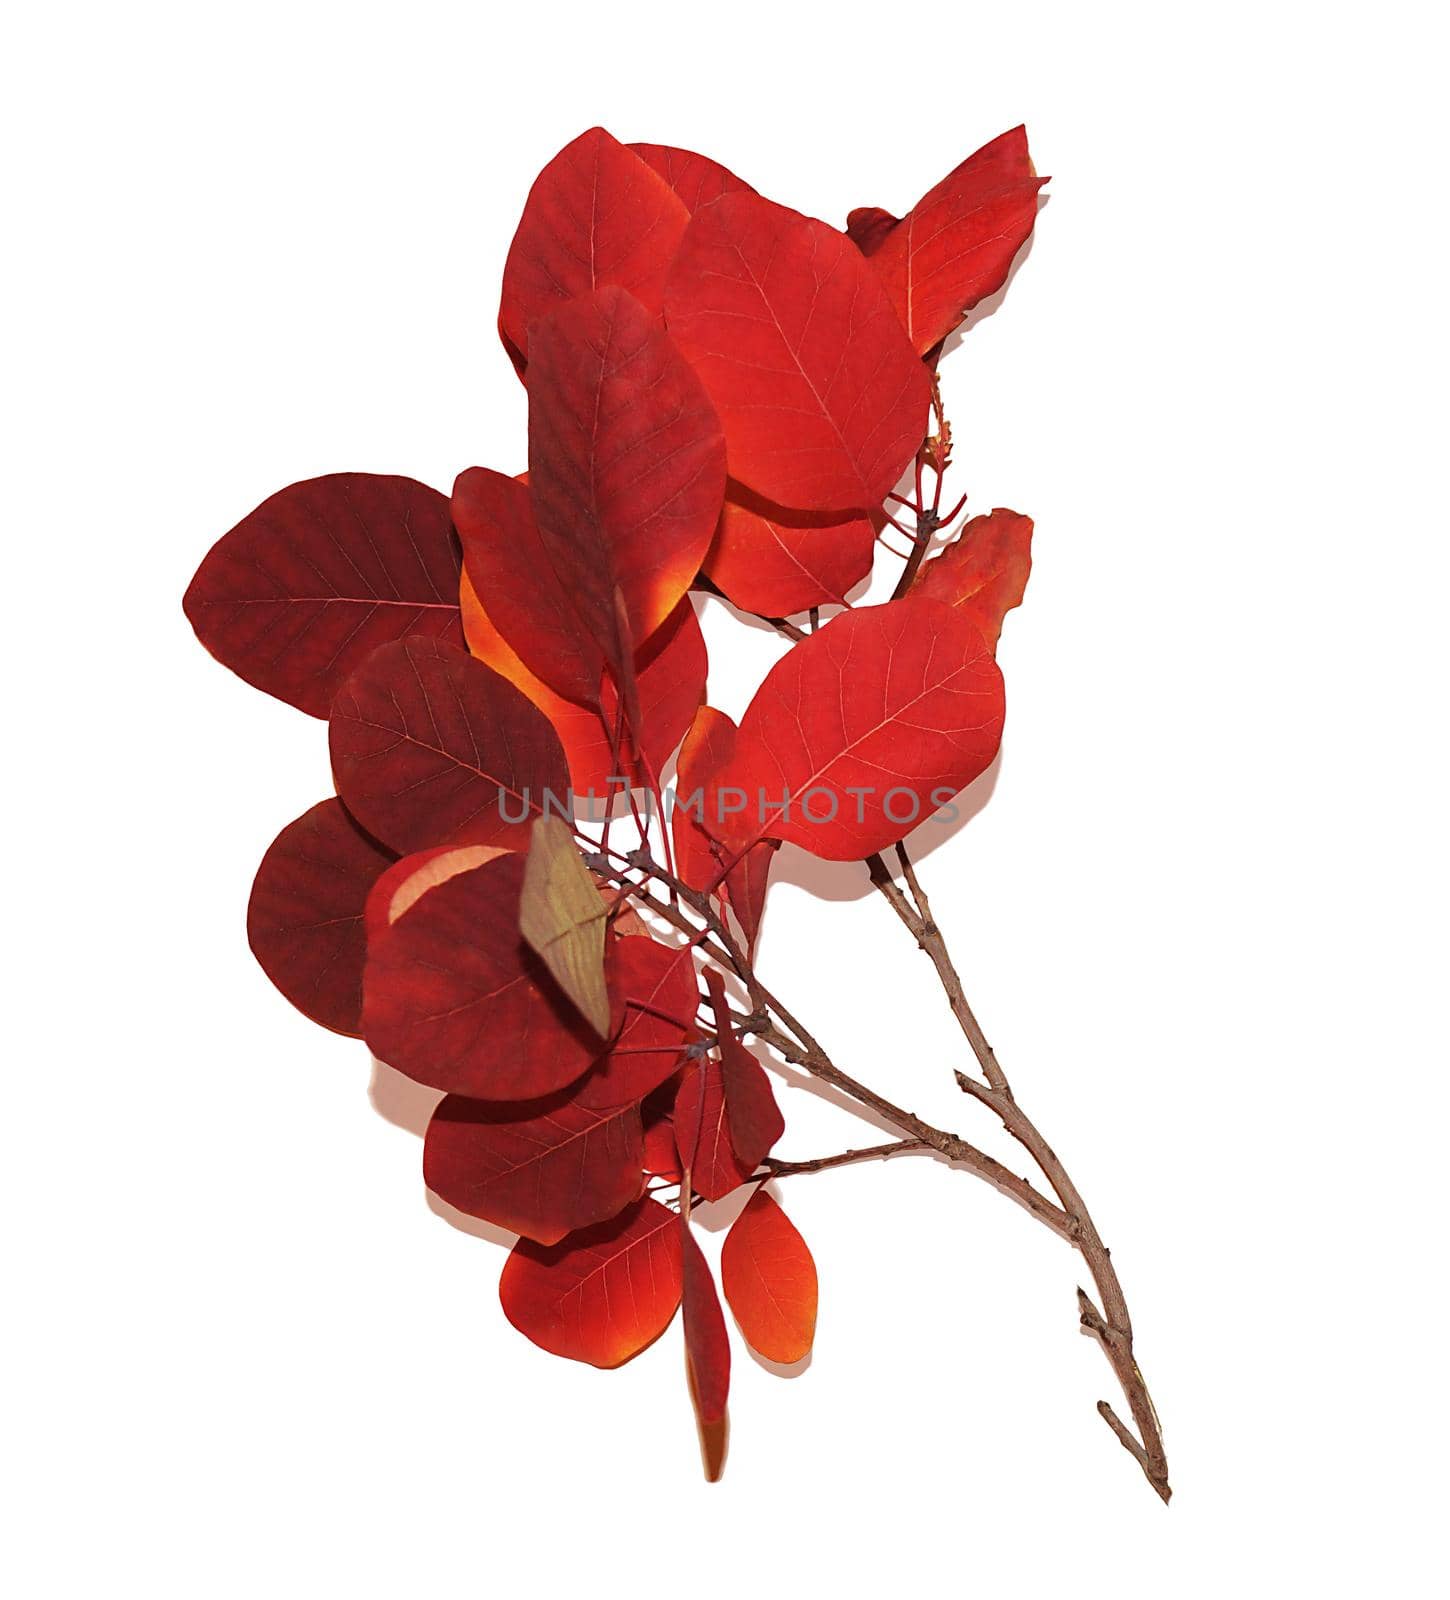 A red-maroon barberry branch highlighted on a white background. A shrub for an ornamental garden, a design element.Texture or background